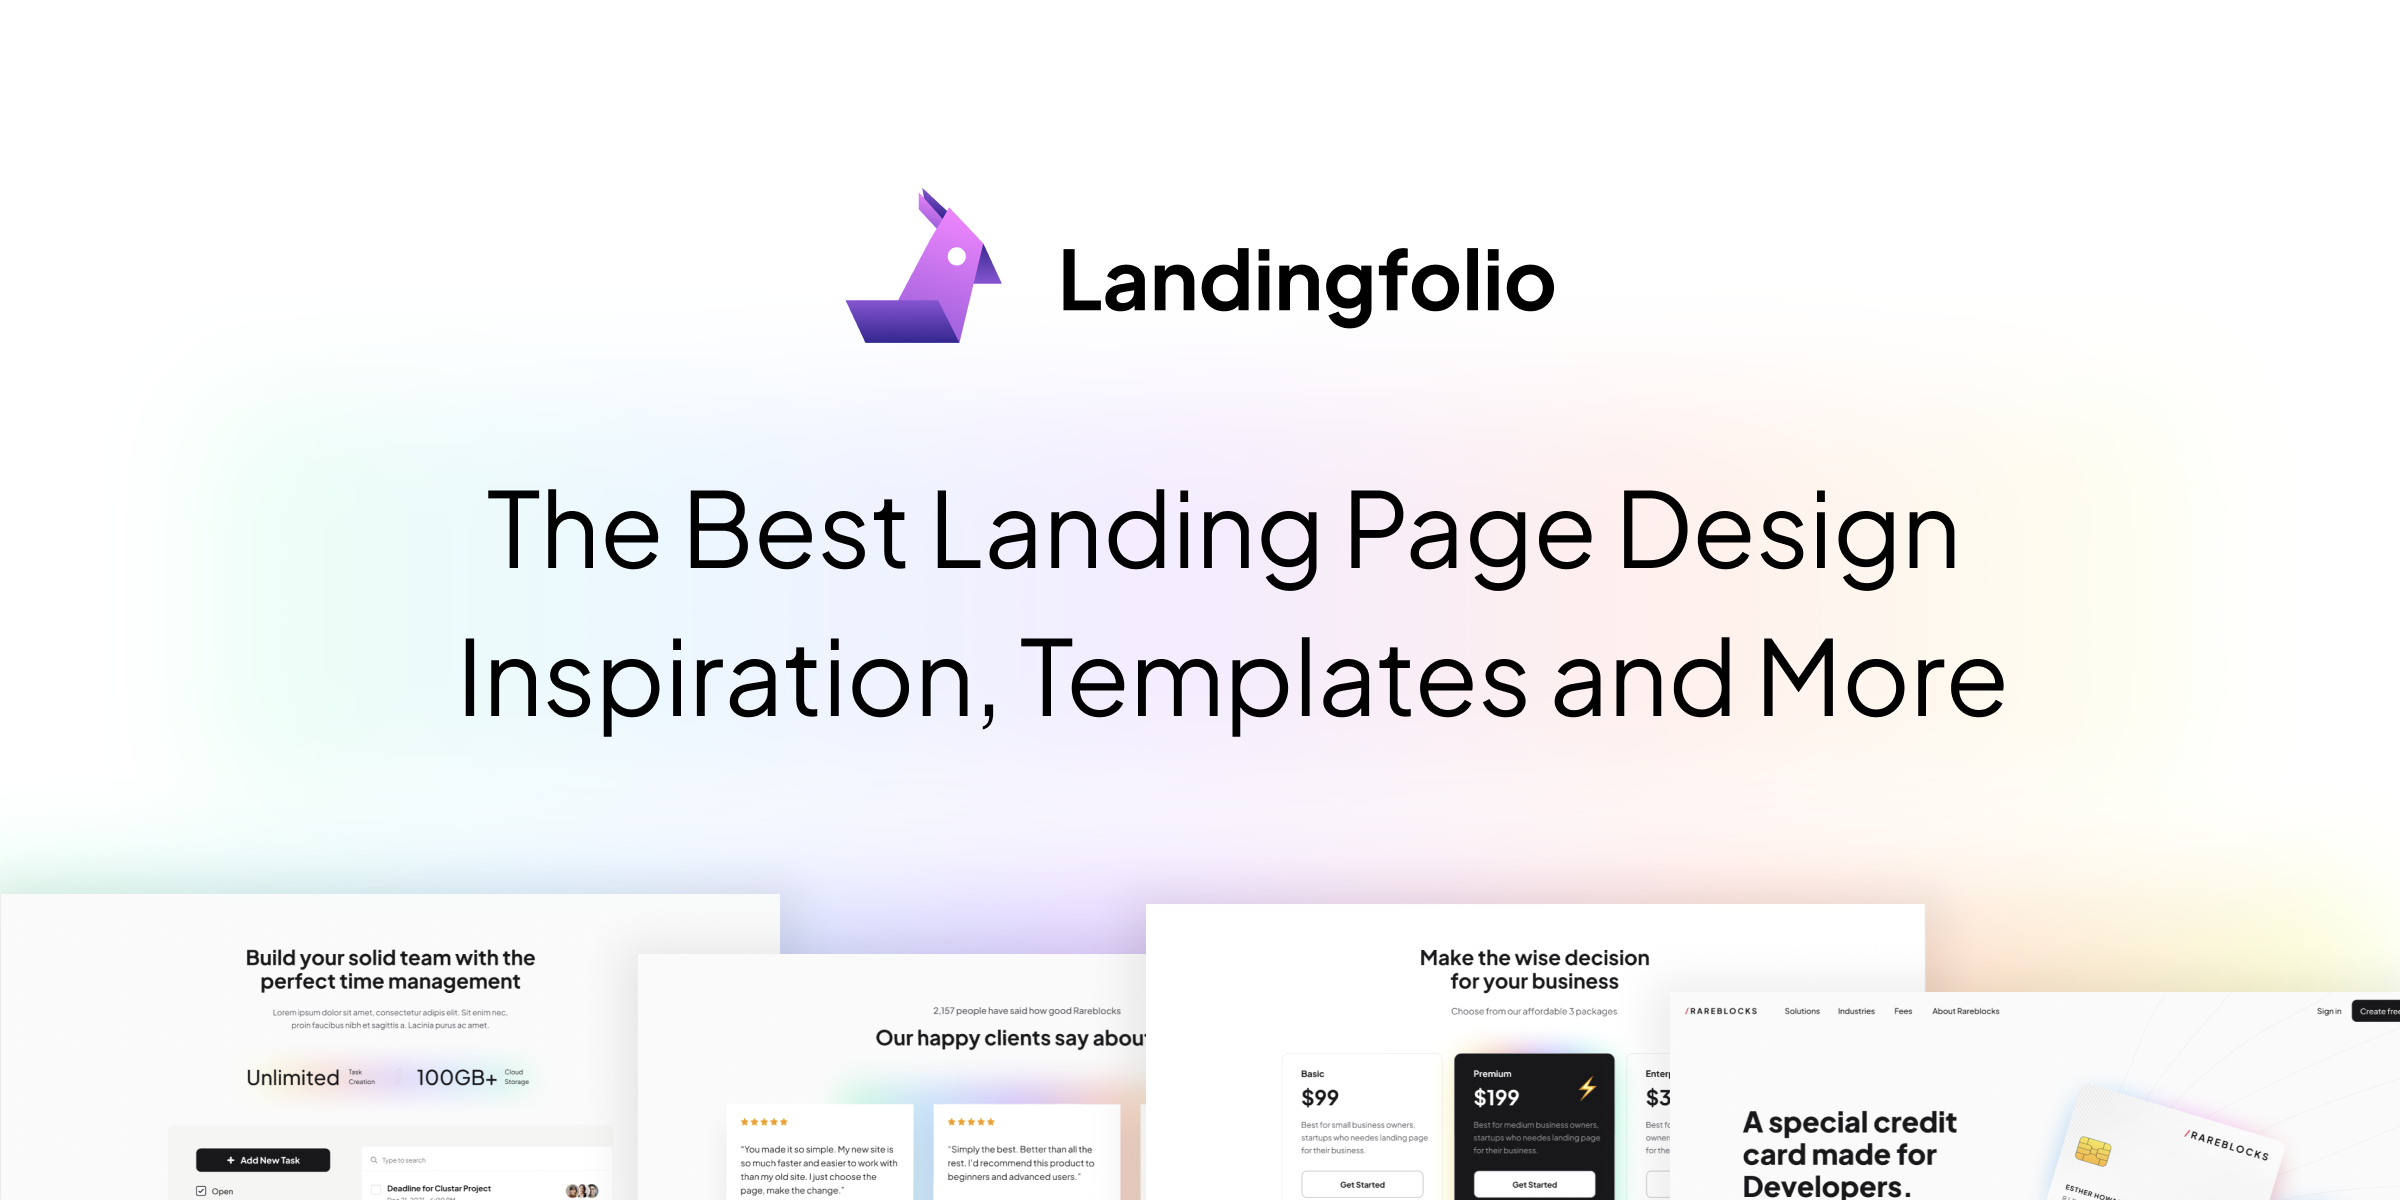 The Best Landing Page Design Inspiration, Templates and More